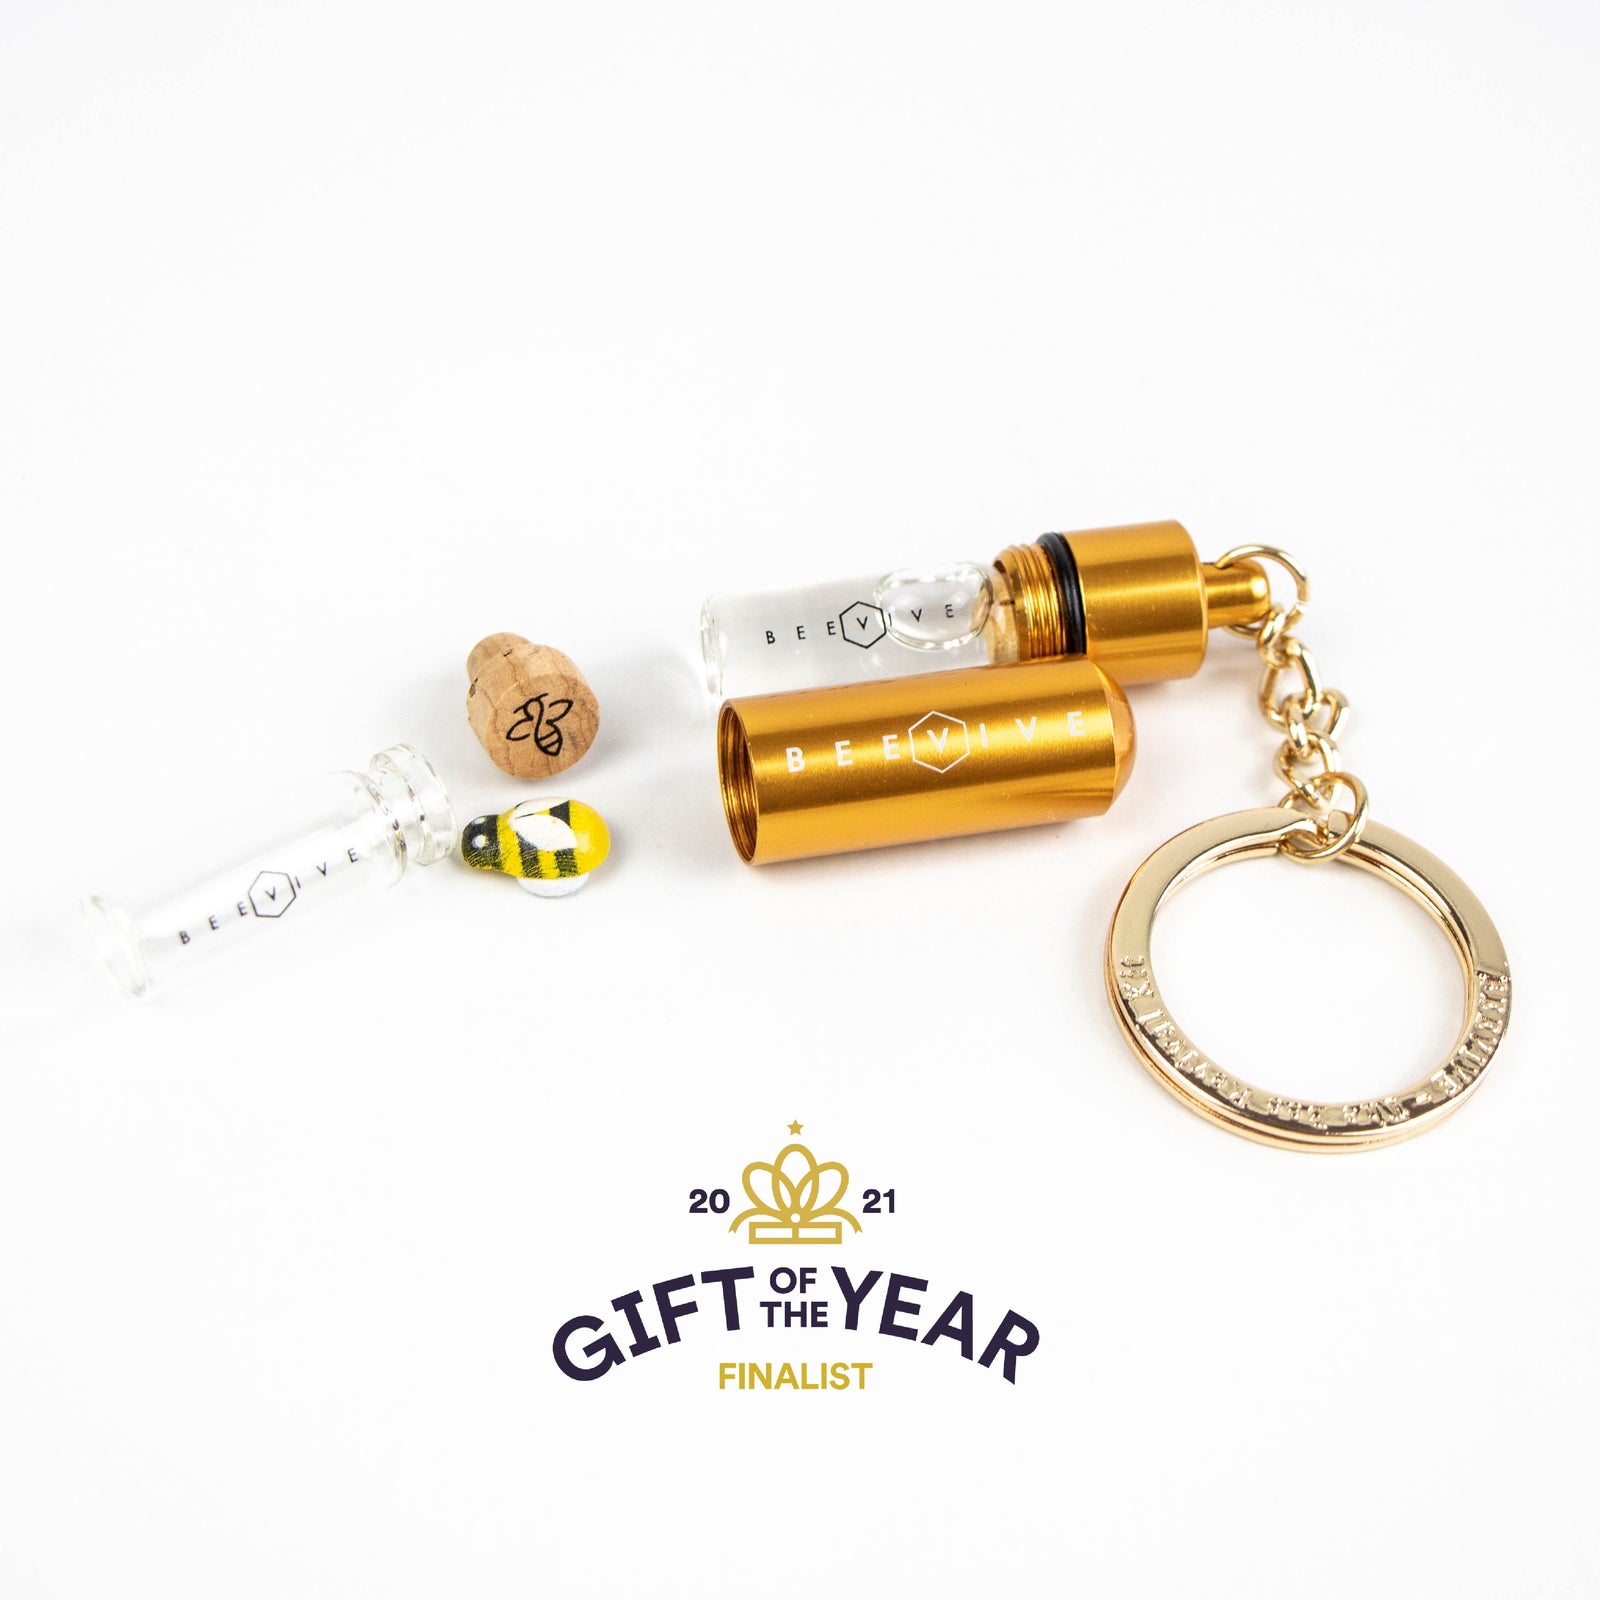 The Bee Revival Kit - GOLD EDITION